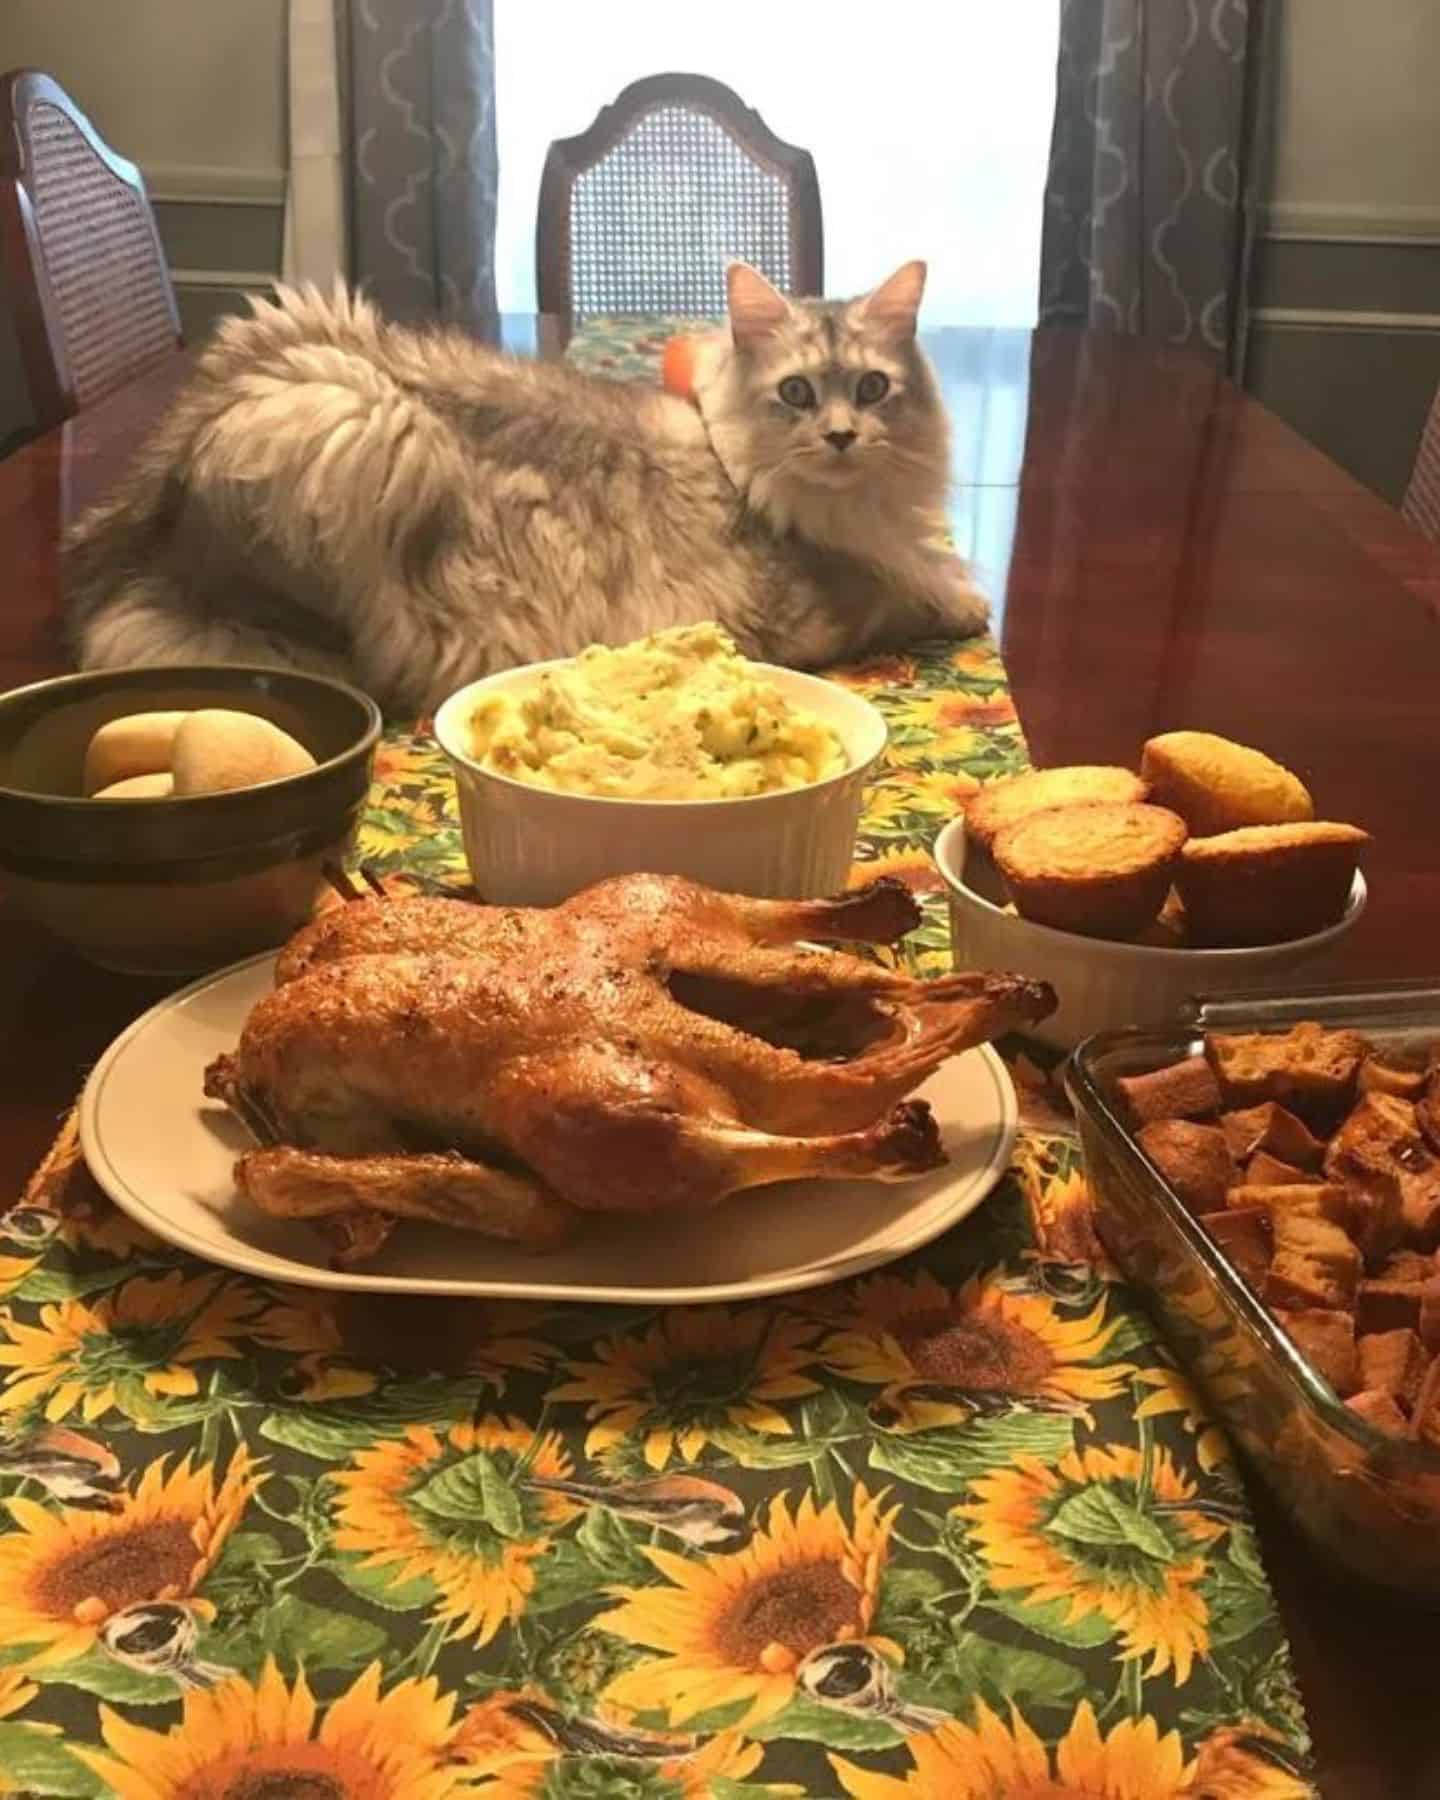 the cat is lying on the table where the food is served